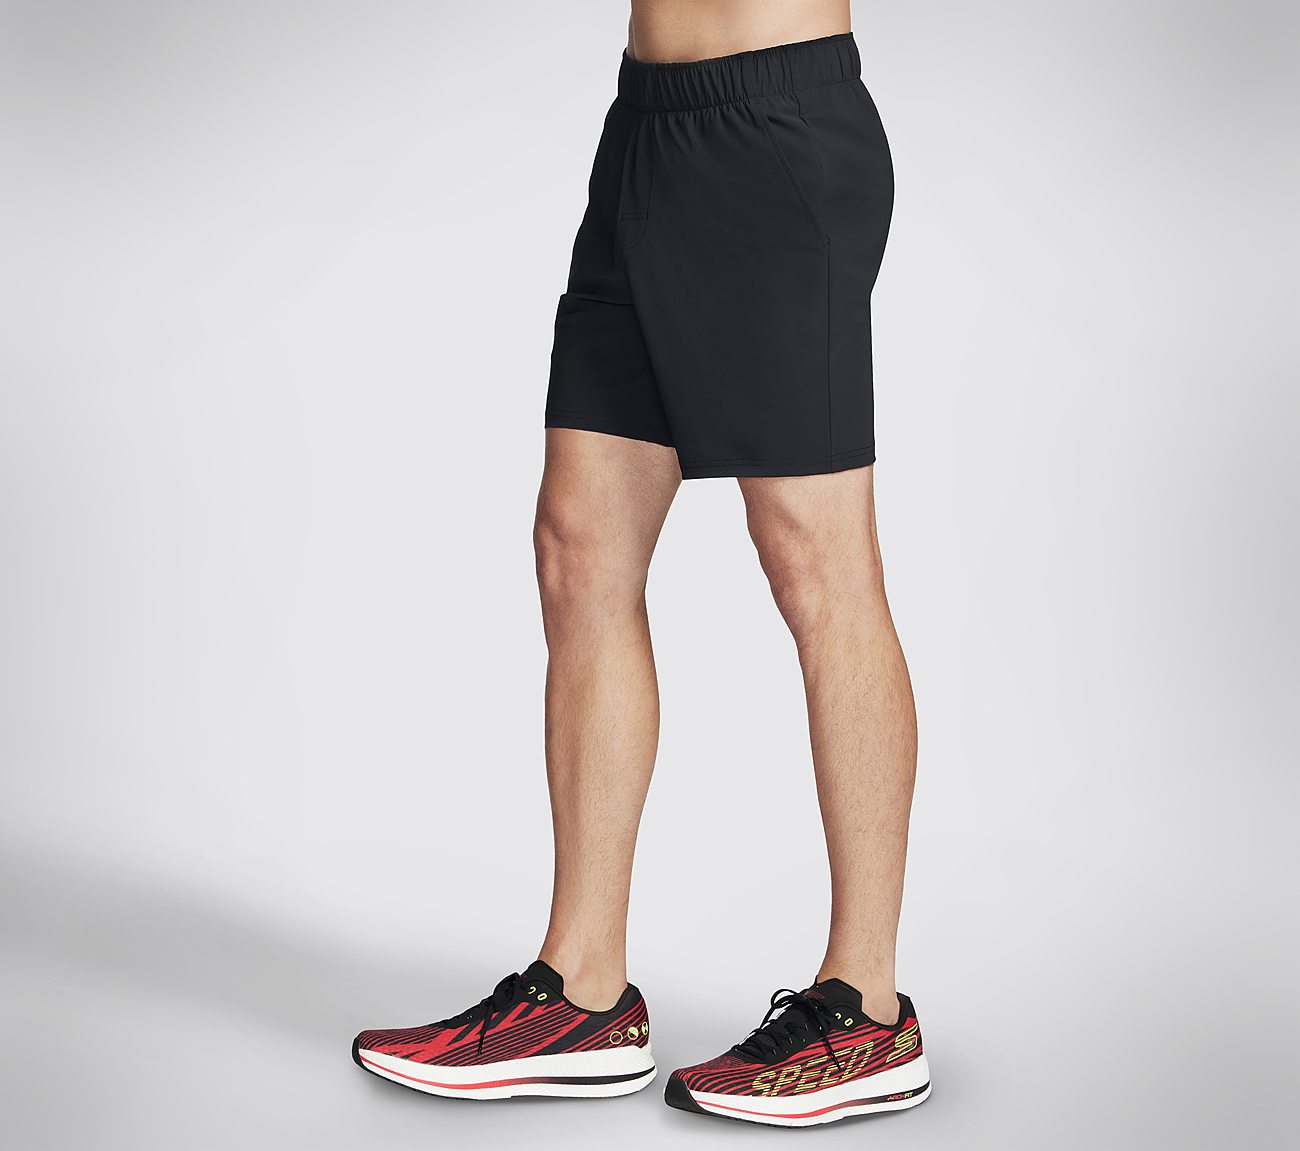 GO Stretch Ultra Shorts Clothes Skechers